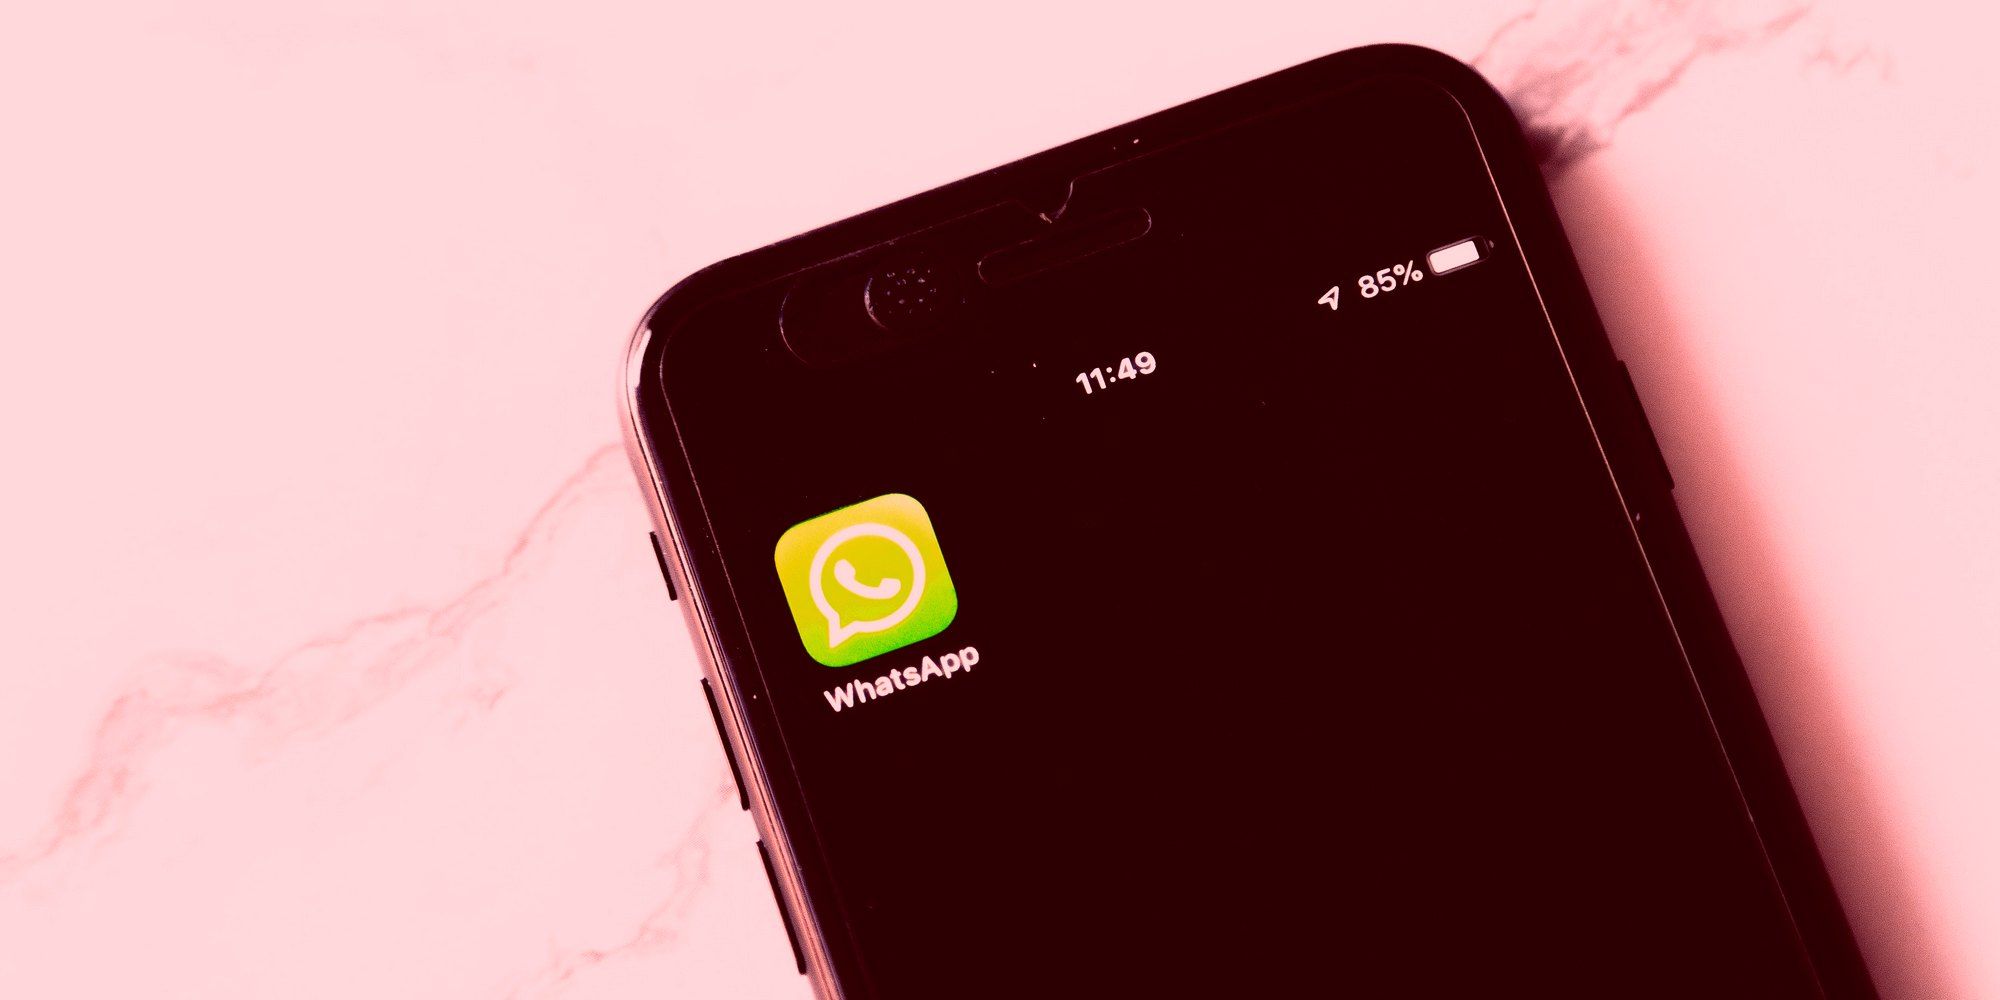 WhatsApp Interoperability With Facebook Services